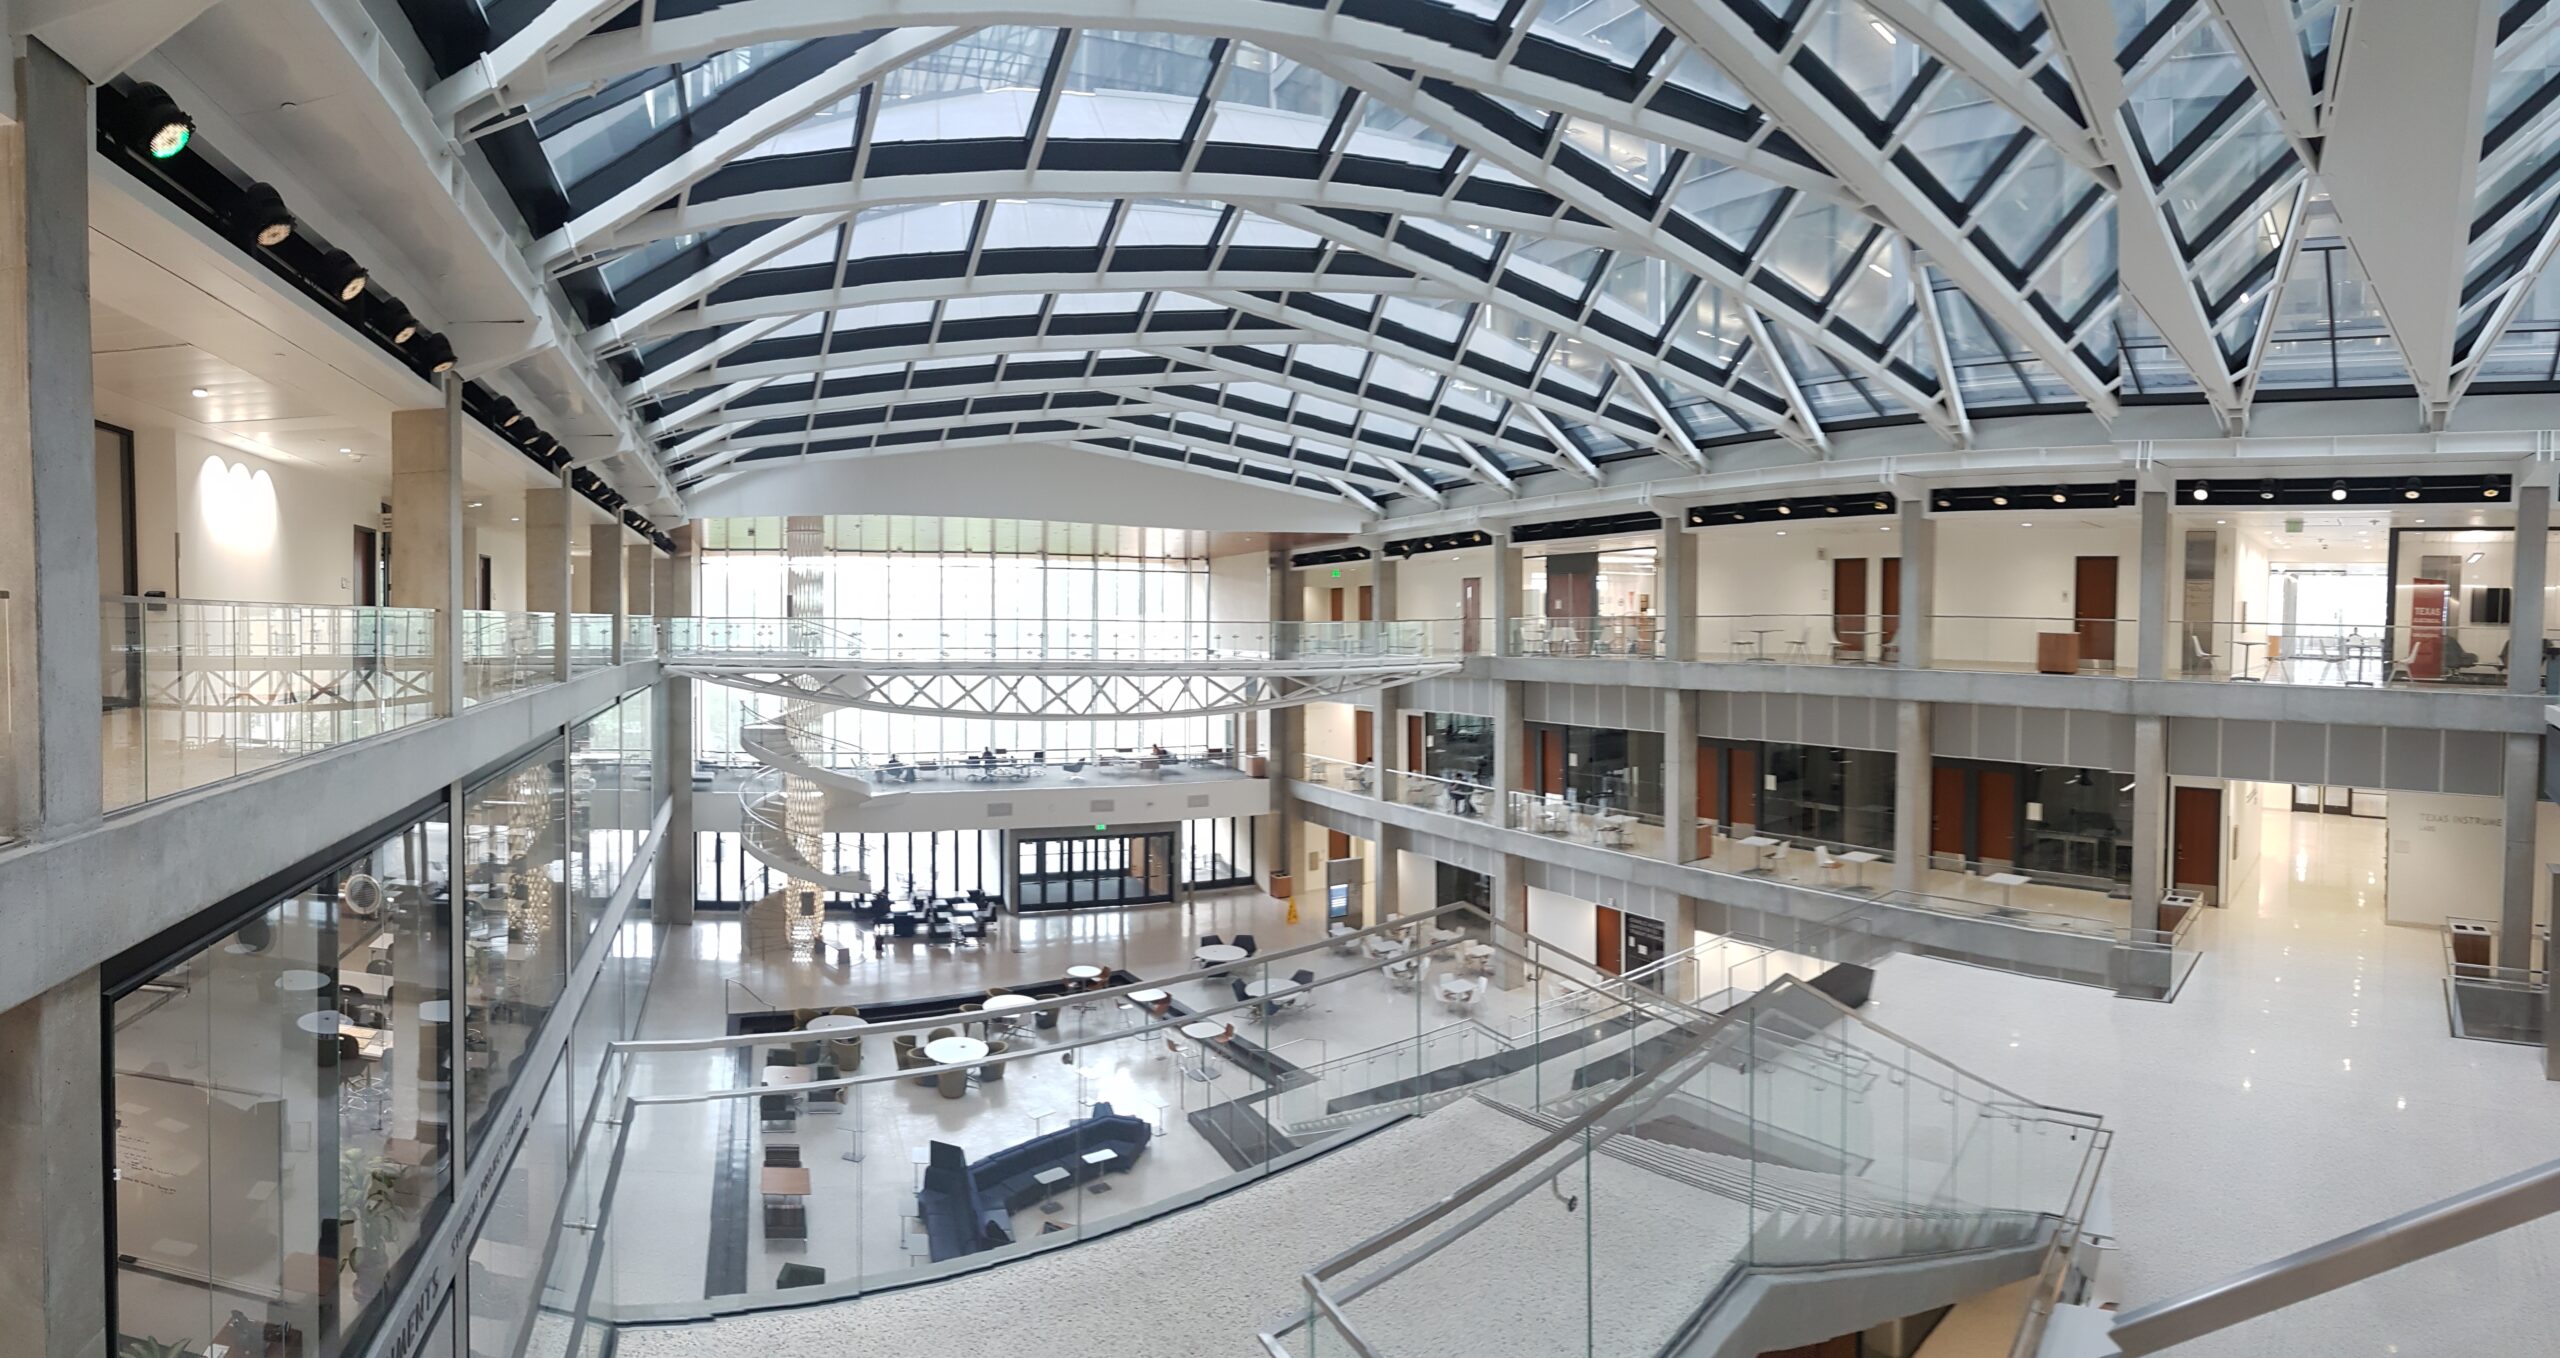 View from the top floor looking into the EER atrium at the University of Texas at Austin